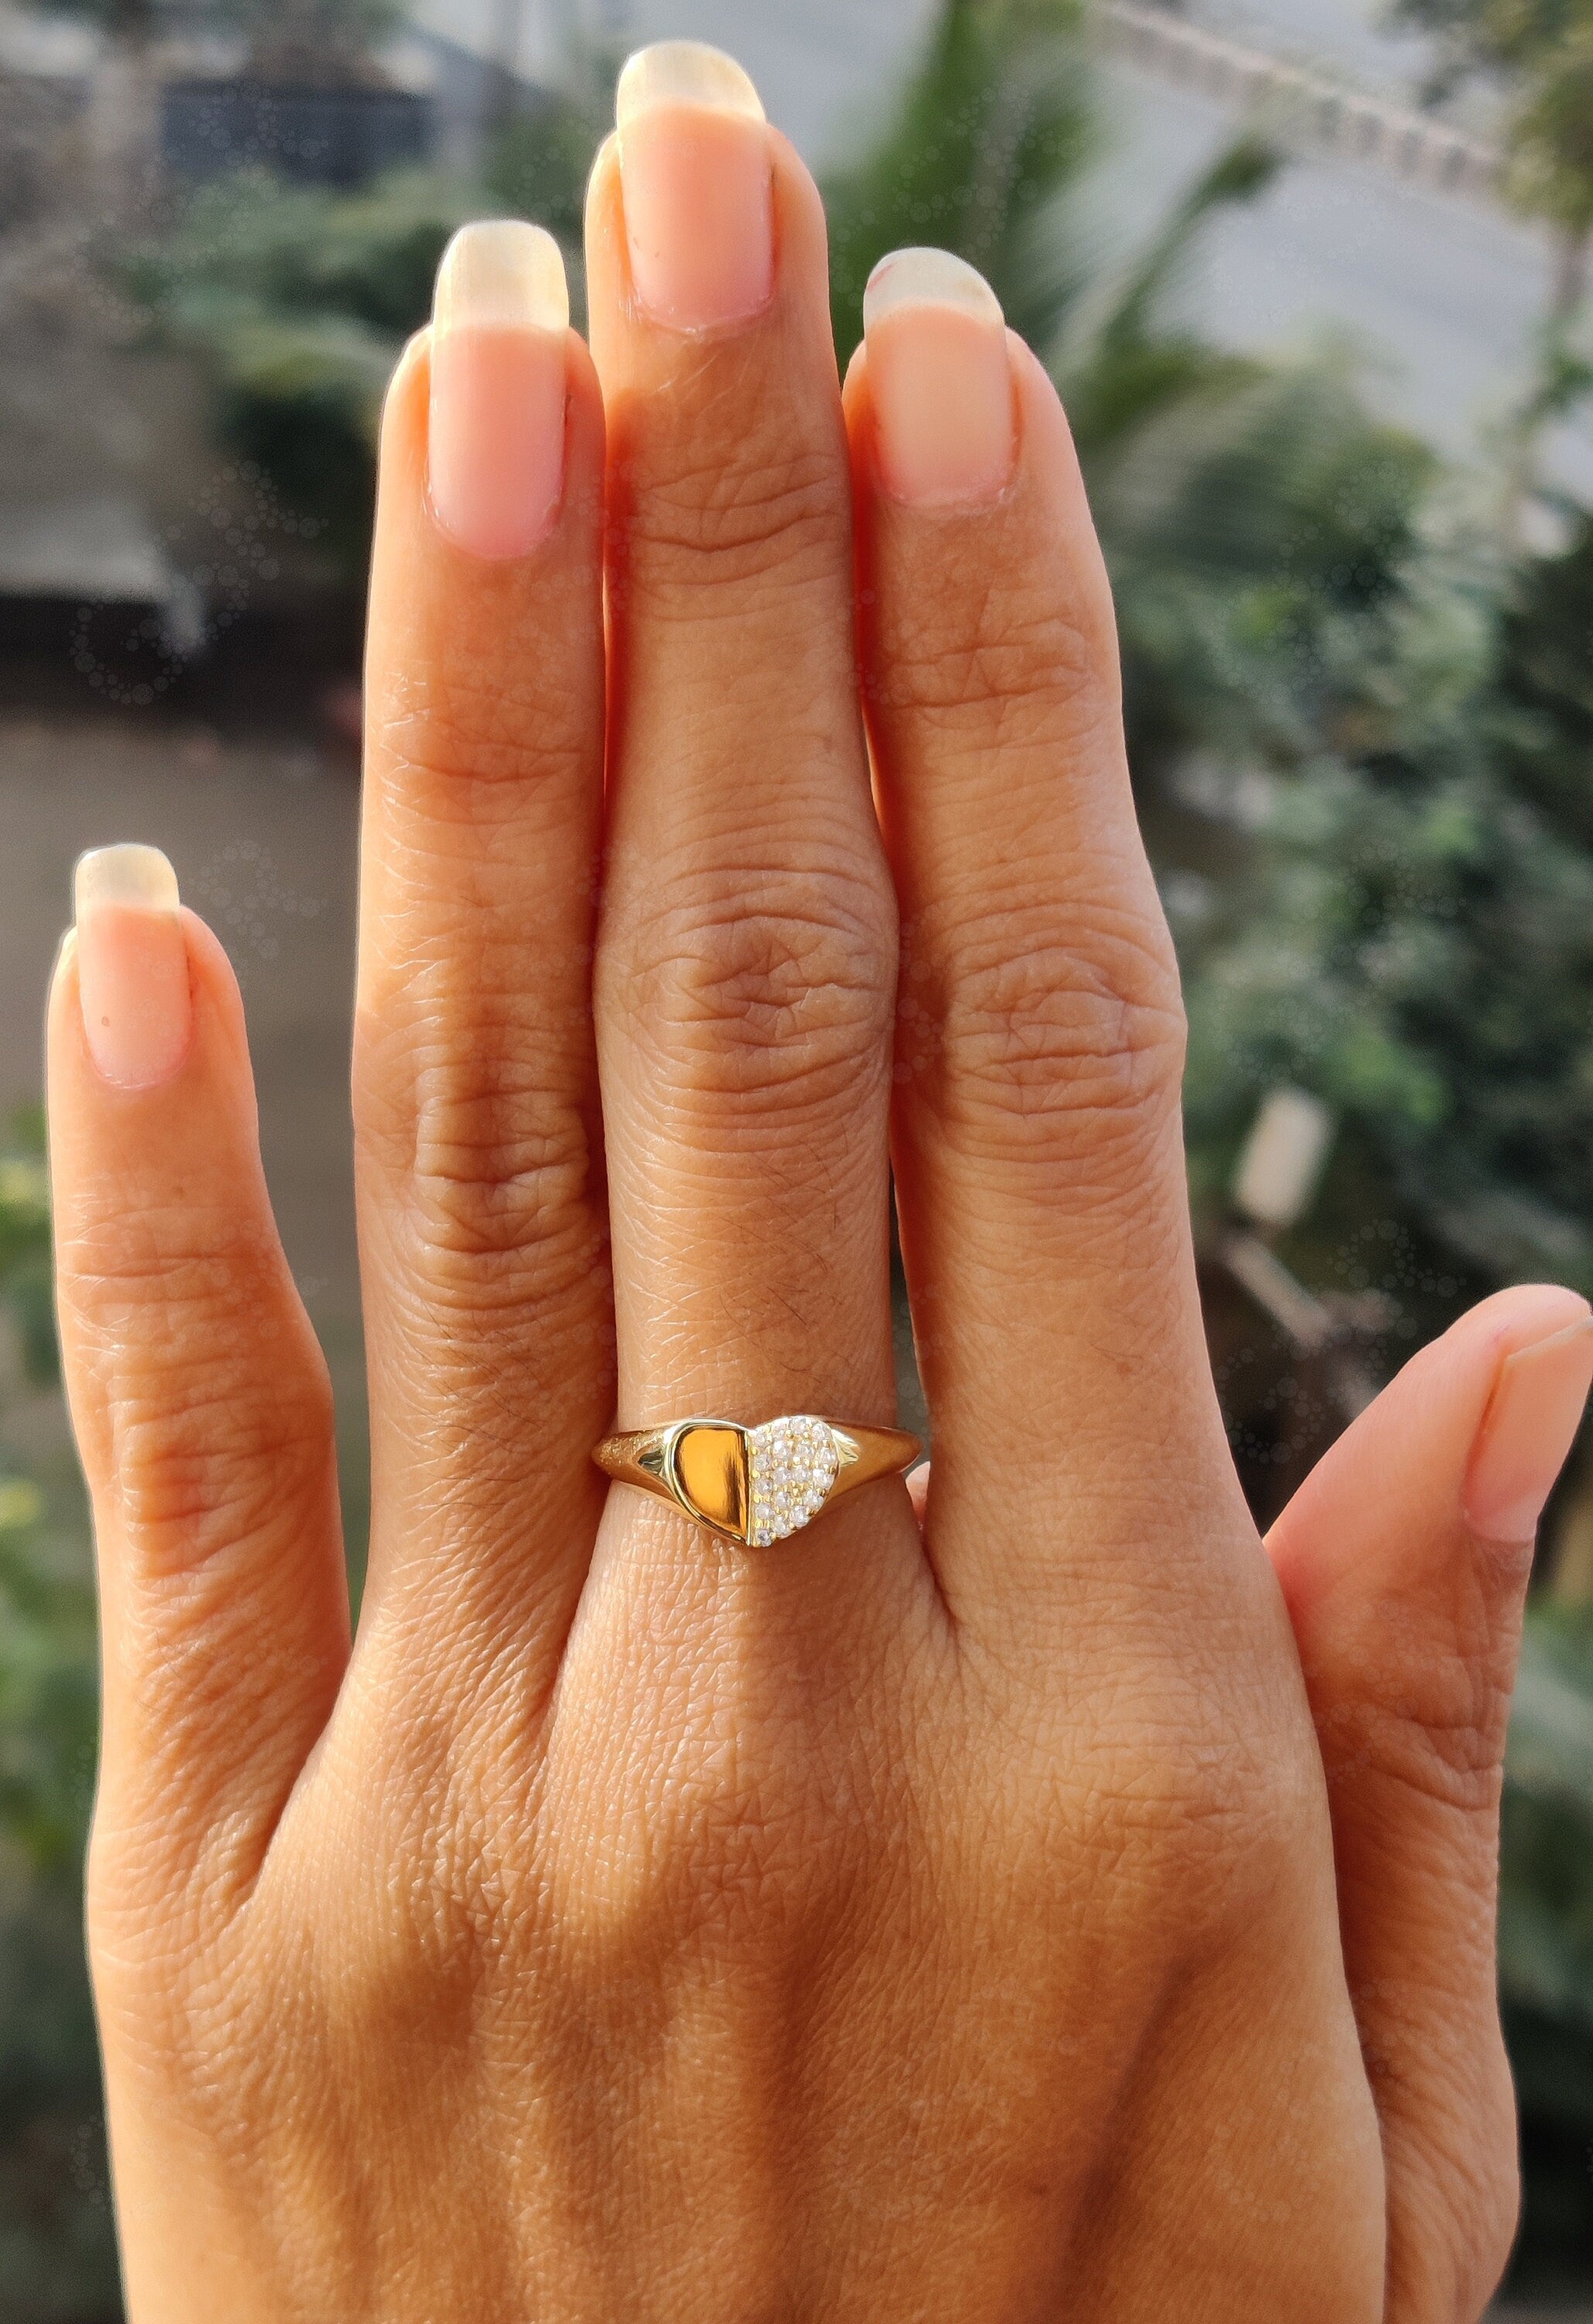 Heartfelt Beauty: Silver and Gold Heart-Shape Moissanite Ring - A Unique Stackable 14k Gold Ring for Women, Perfect for Valentine's Day